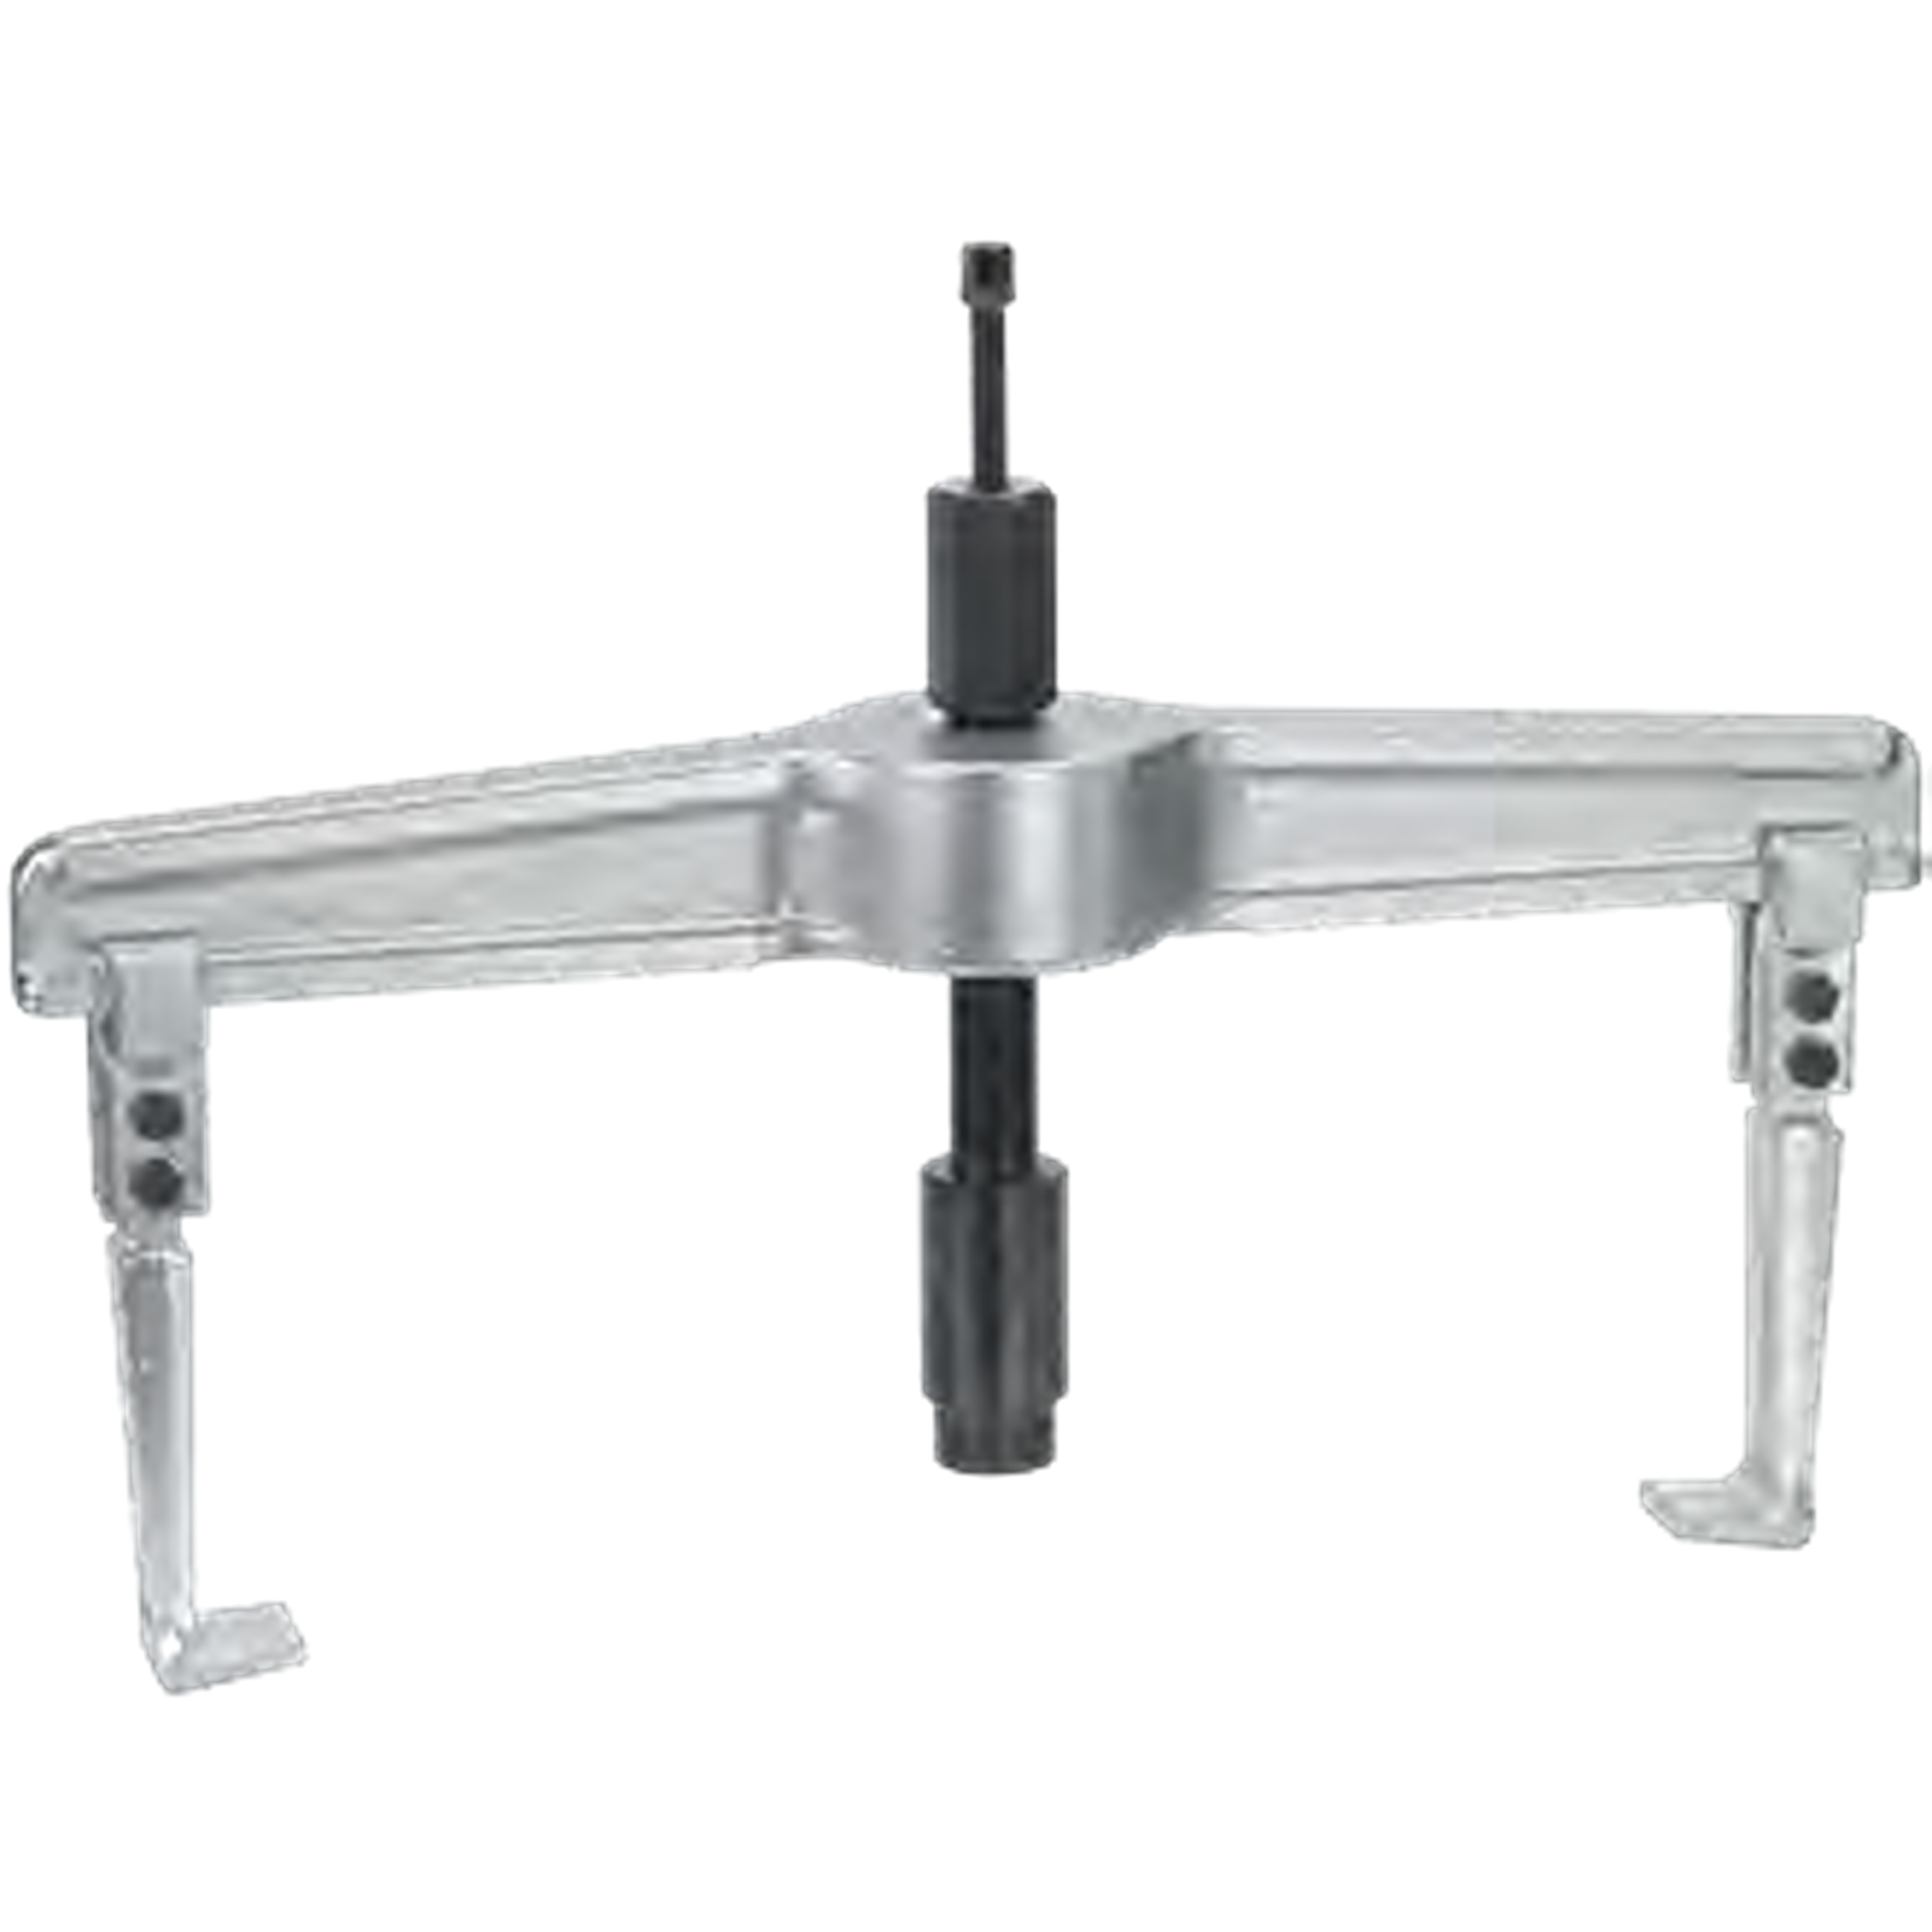 NEXUS 100-5H 2-Arm Universal Puller With Grease-Hydraulic Spindle - Premium 2-Arm Universal Puller With Grease-Hydraulic Spindle from NEXUS - Shop now at Yew Aik.